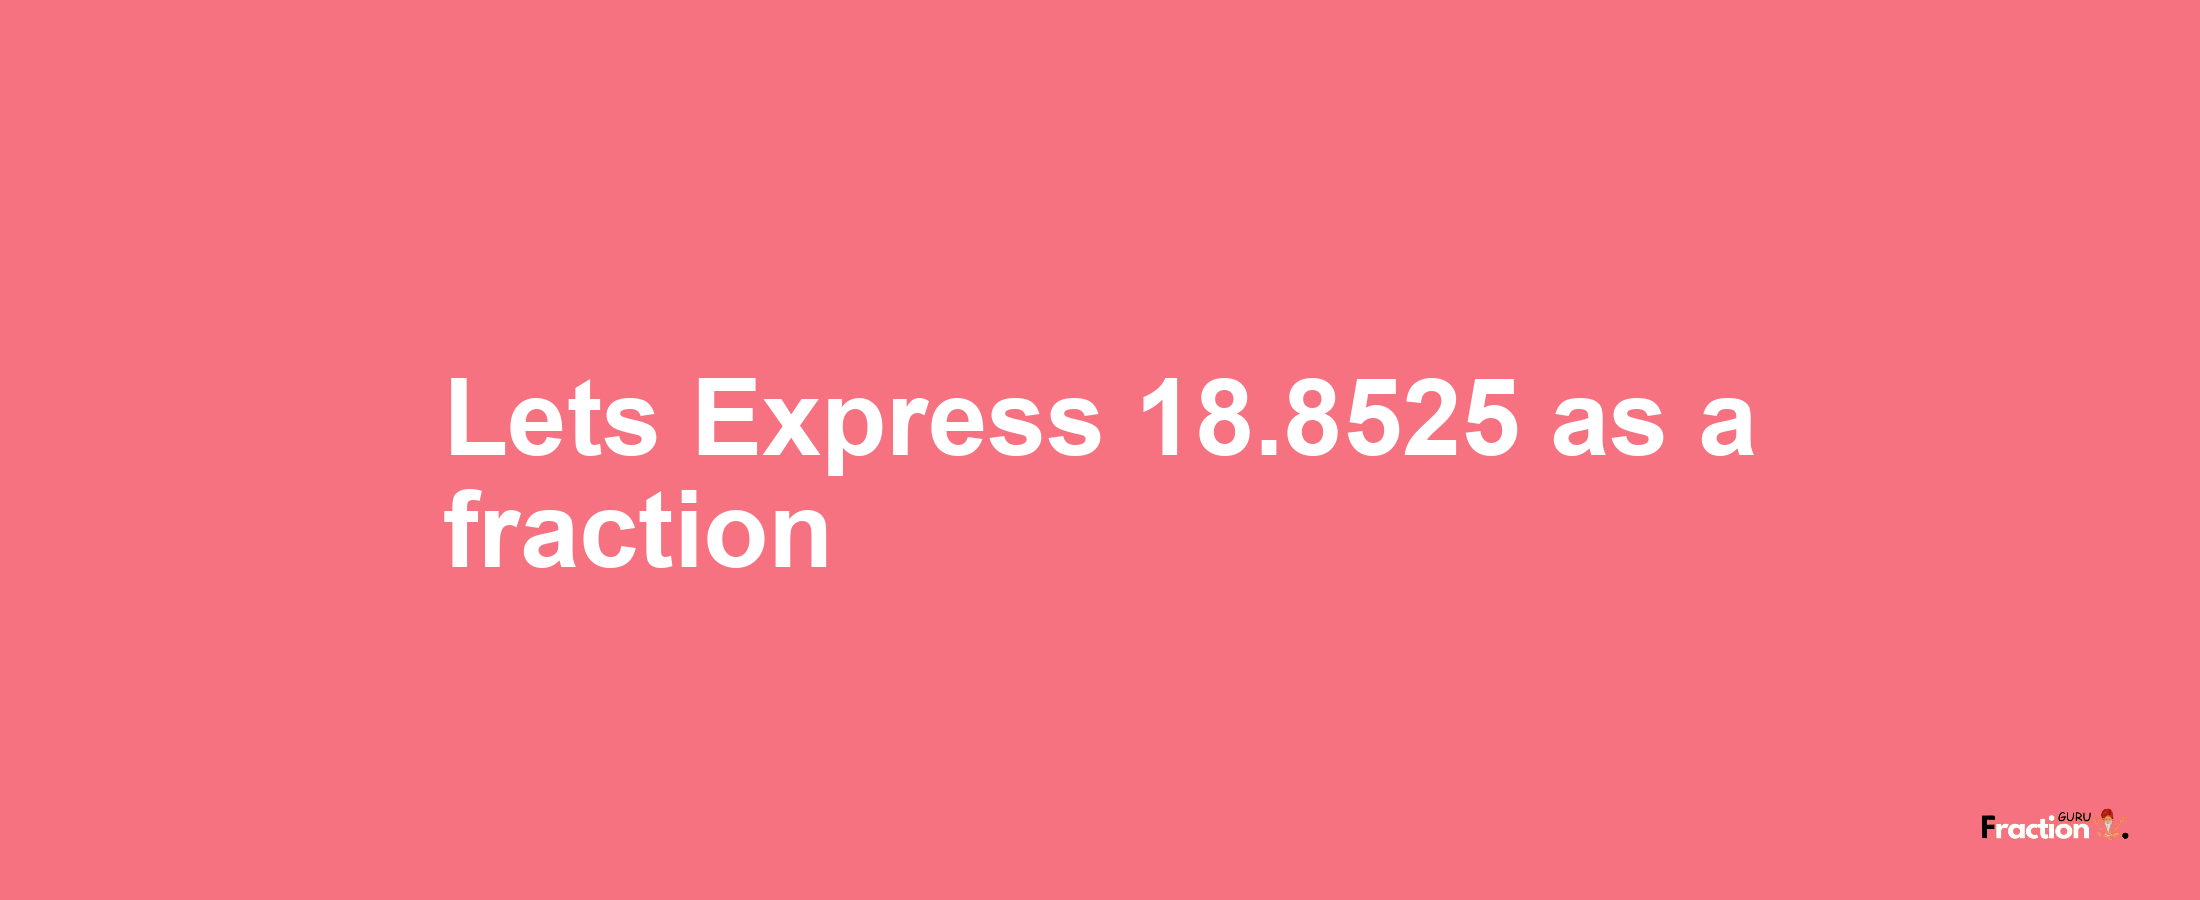 Lets Express 18.8525 as afraction